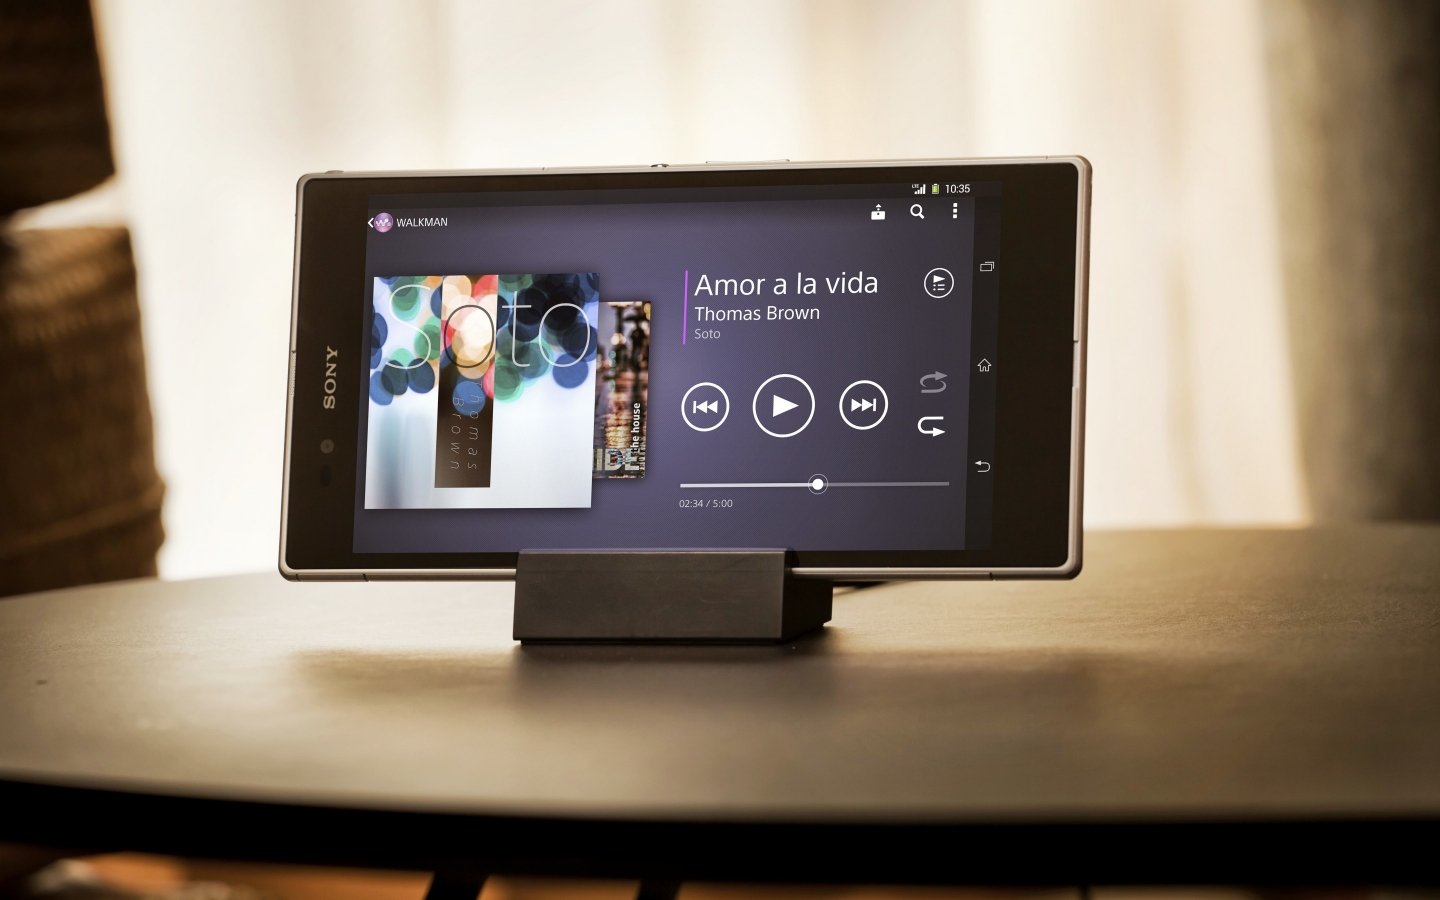 Sony Xperia Z Ultra for 1440 x 900 widescreen resolution